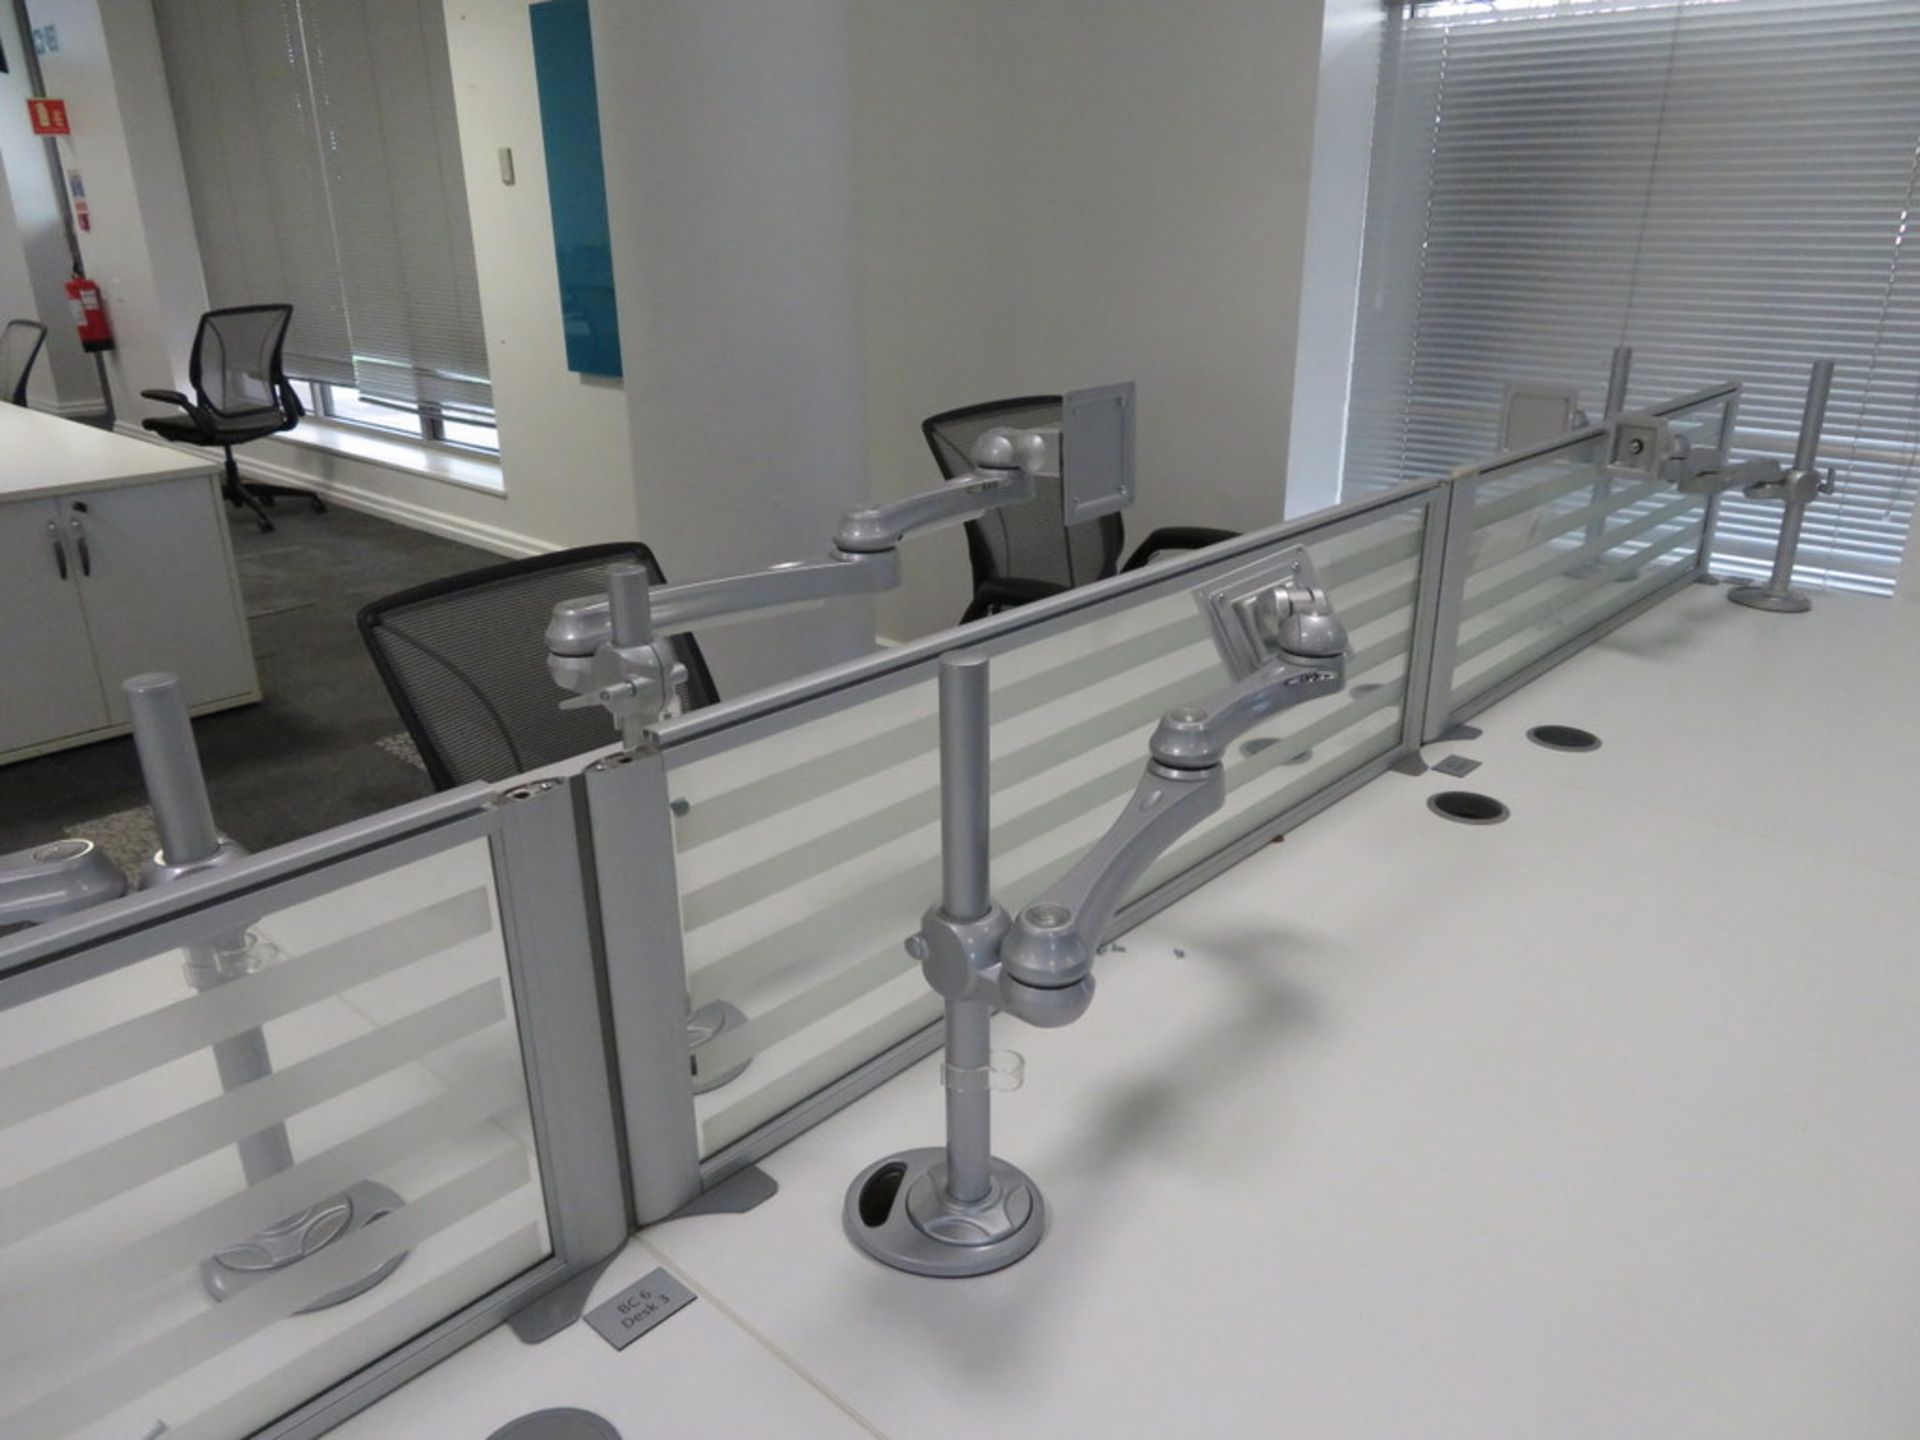 6 Person Desk Arrangement With Dividers, Monitor Arms & Storage Cupboards. Chairs Are Not Included. - Image 4 of 4